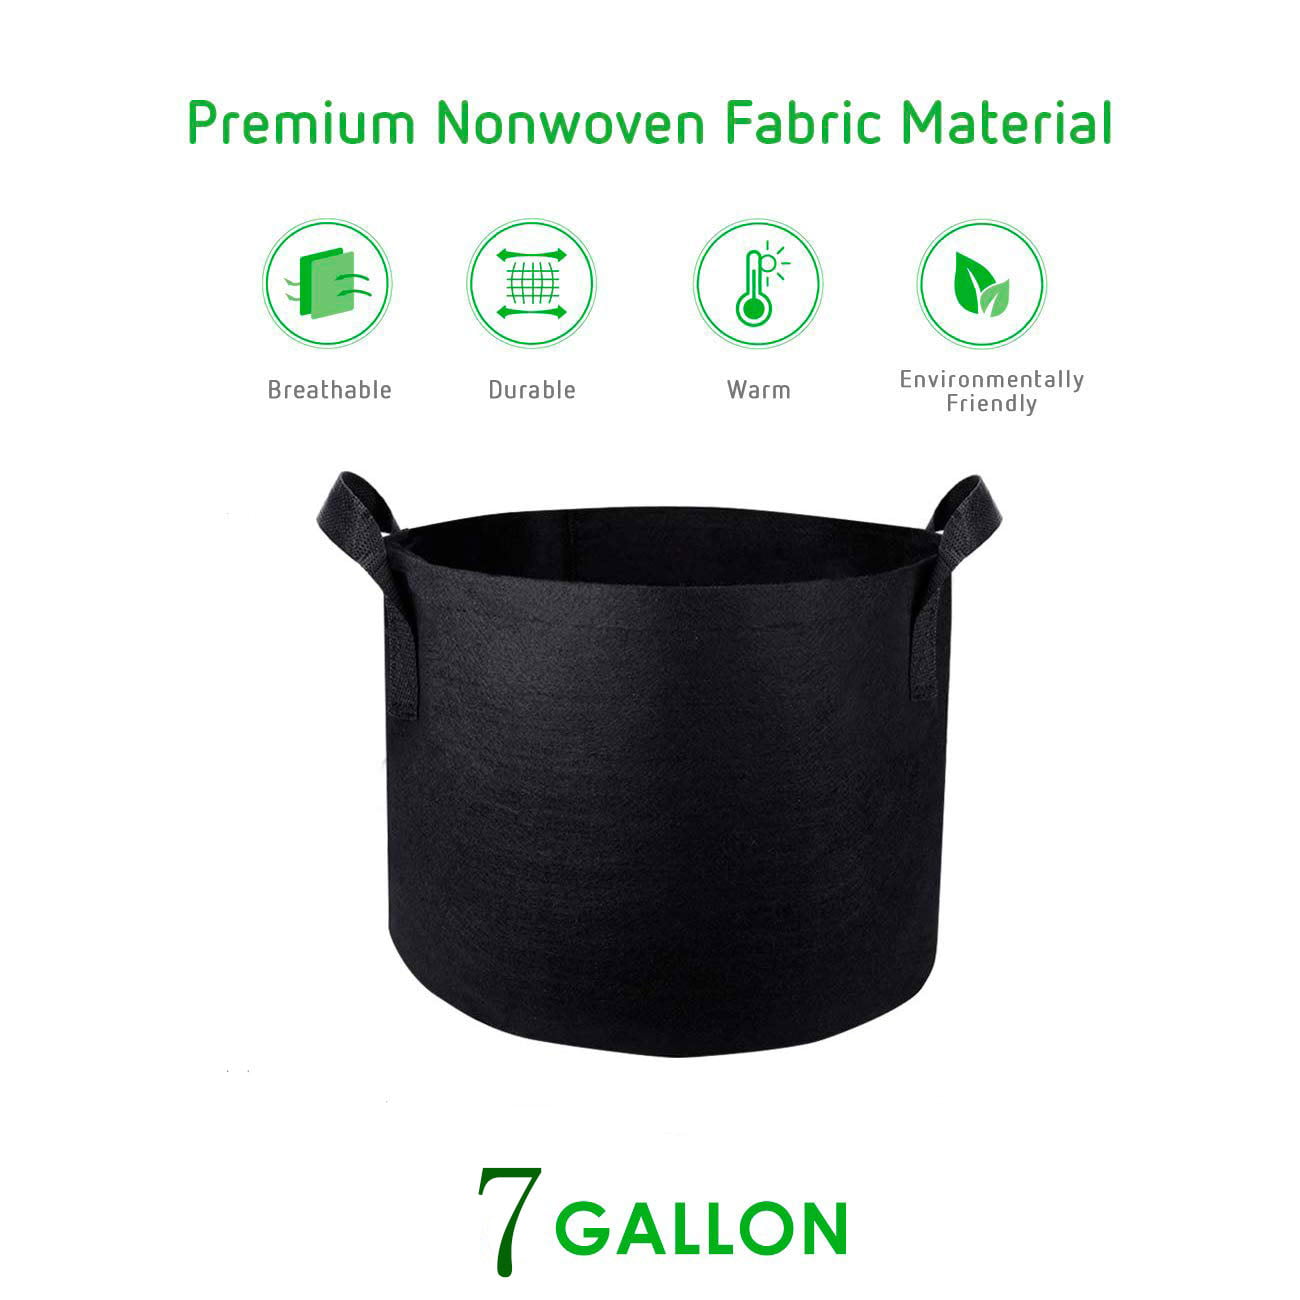 Nonwoven Heavy Duty Aeration Fabrick Pots with Handles 2 Pack Vegetables/Flower/Plants Growing Bag Black Grow Bags 7 Gallon 